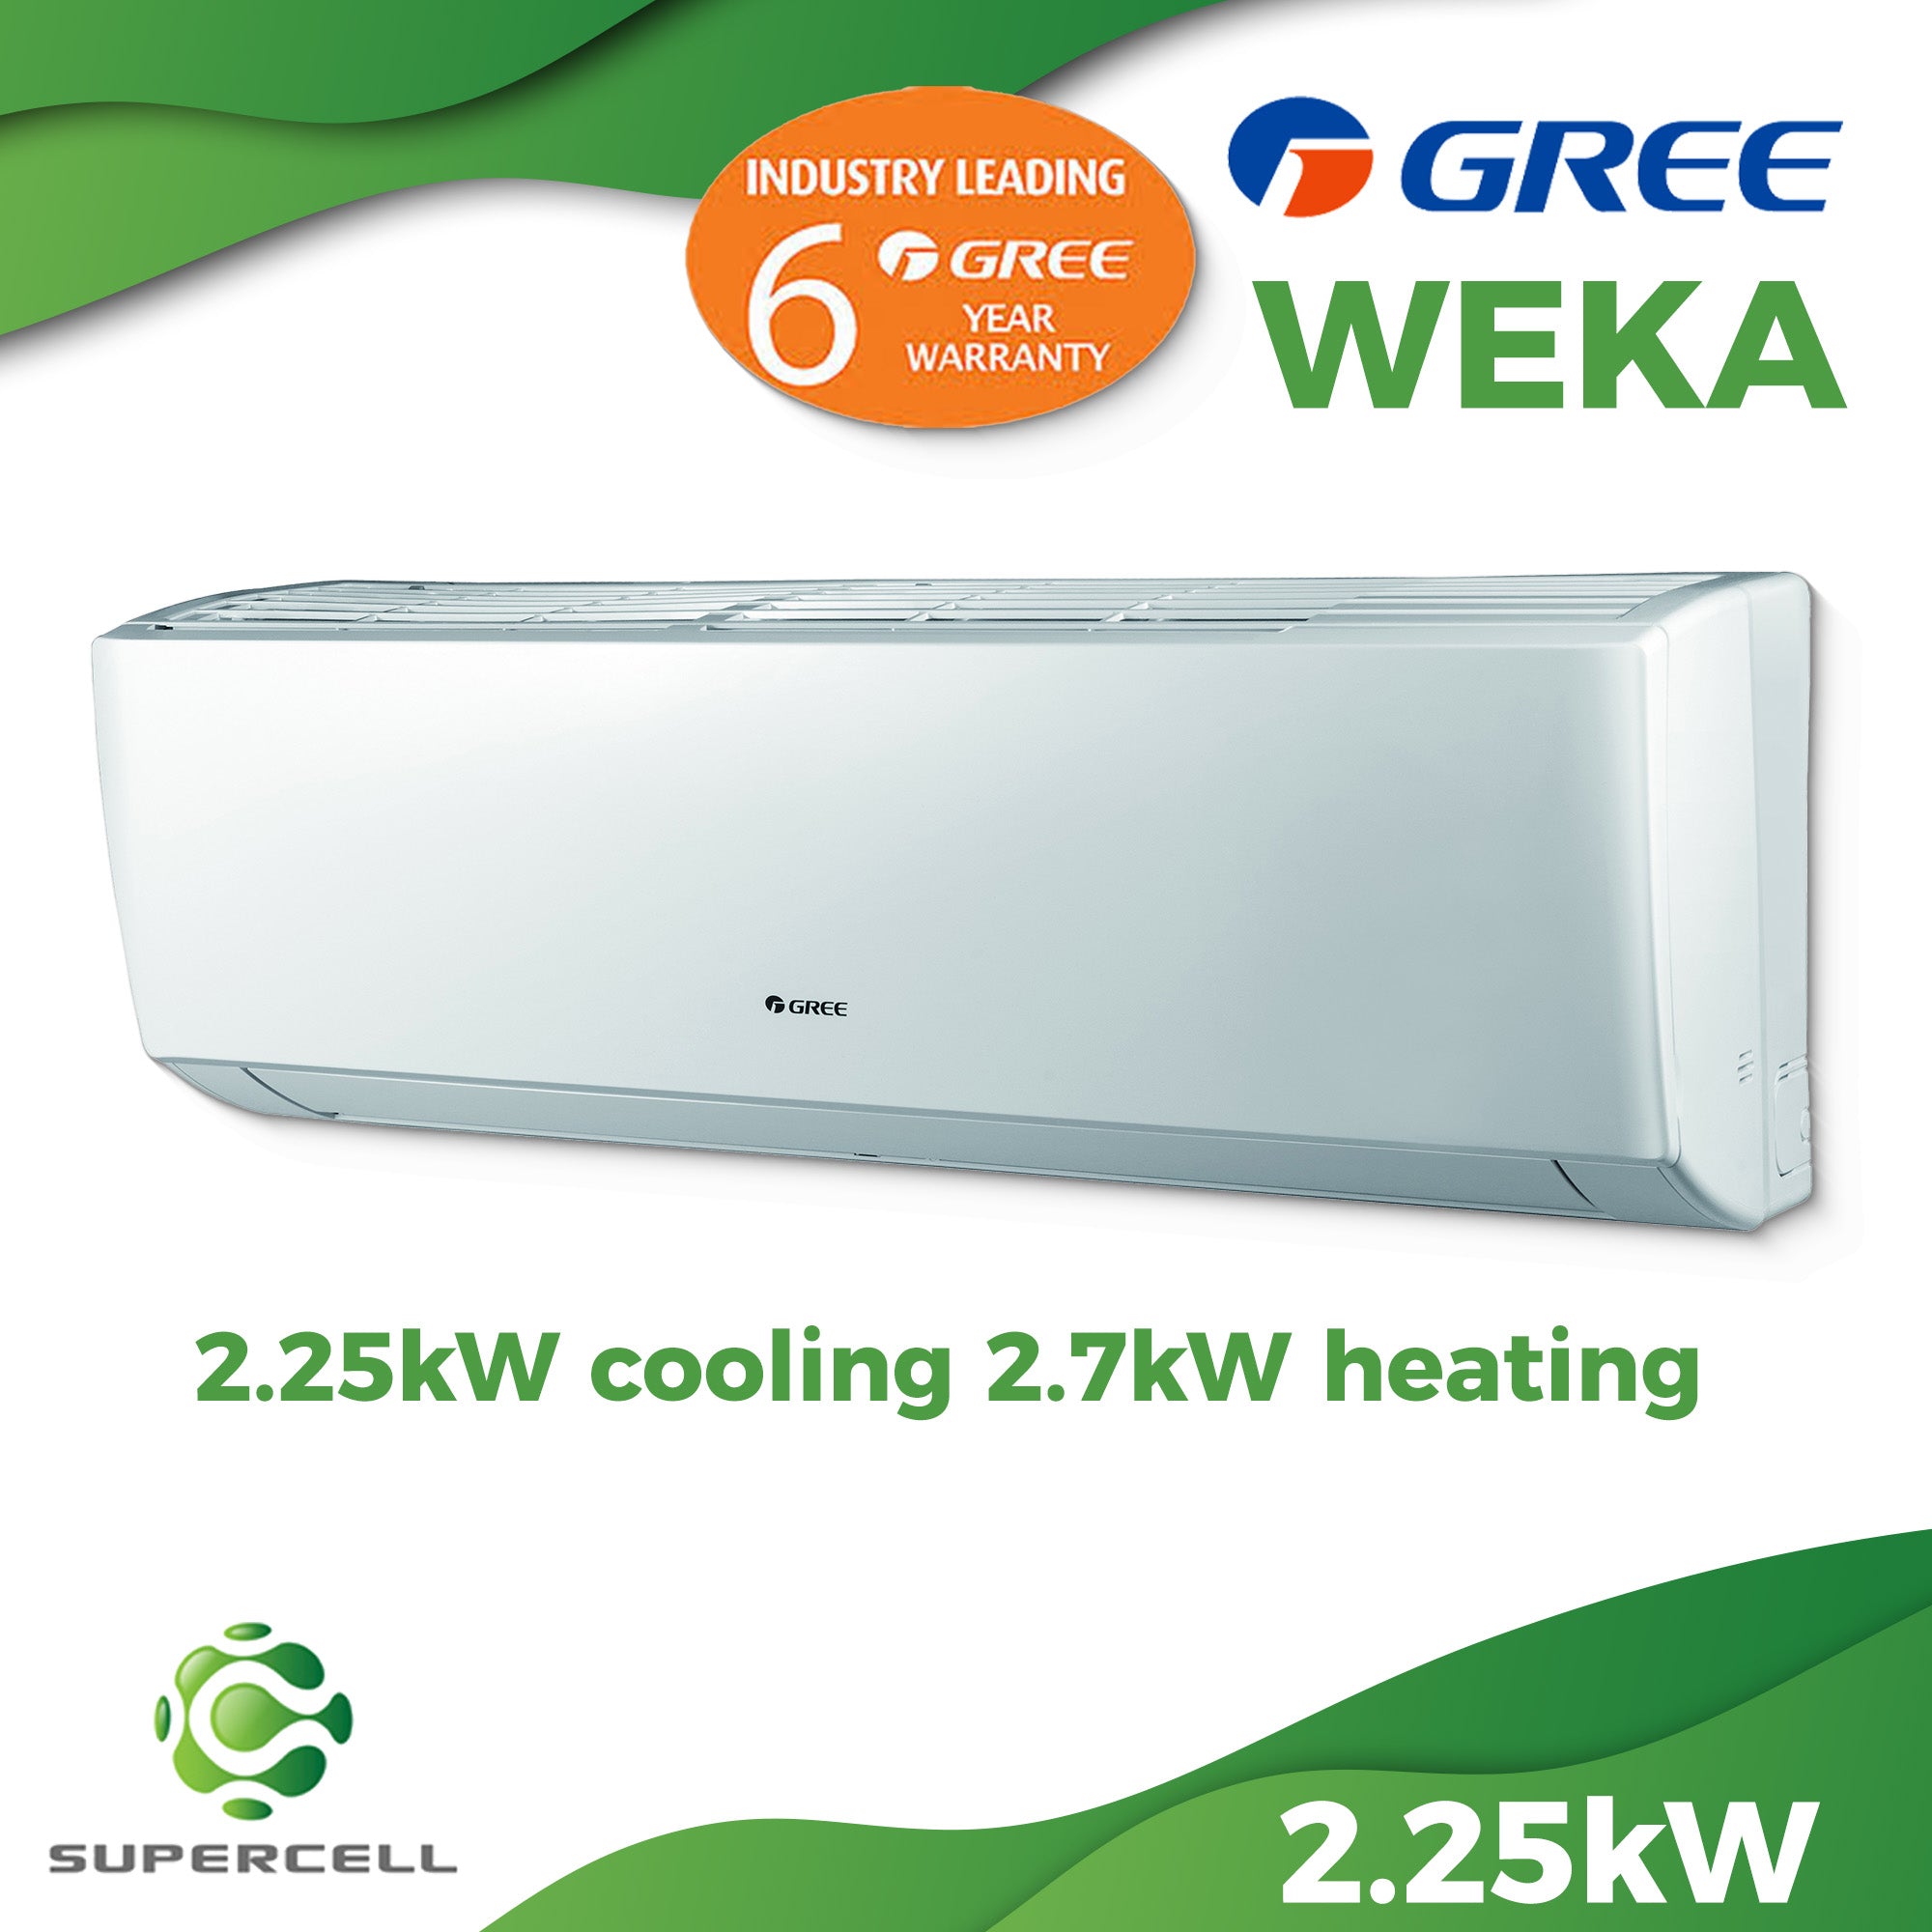 Gree WEKA Heat Pump 2.25kw cooling 2.7kw heating Limited offer - supercellnz